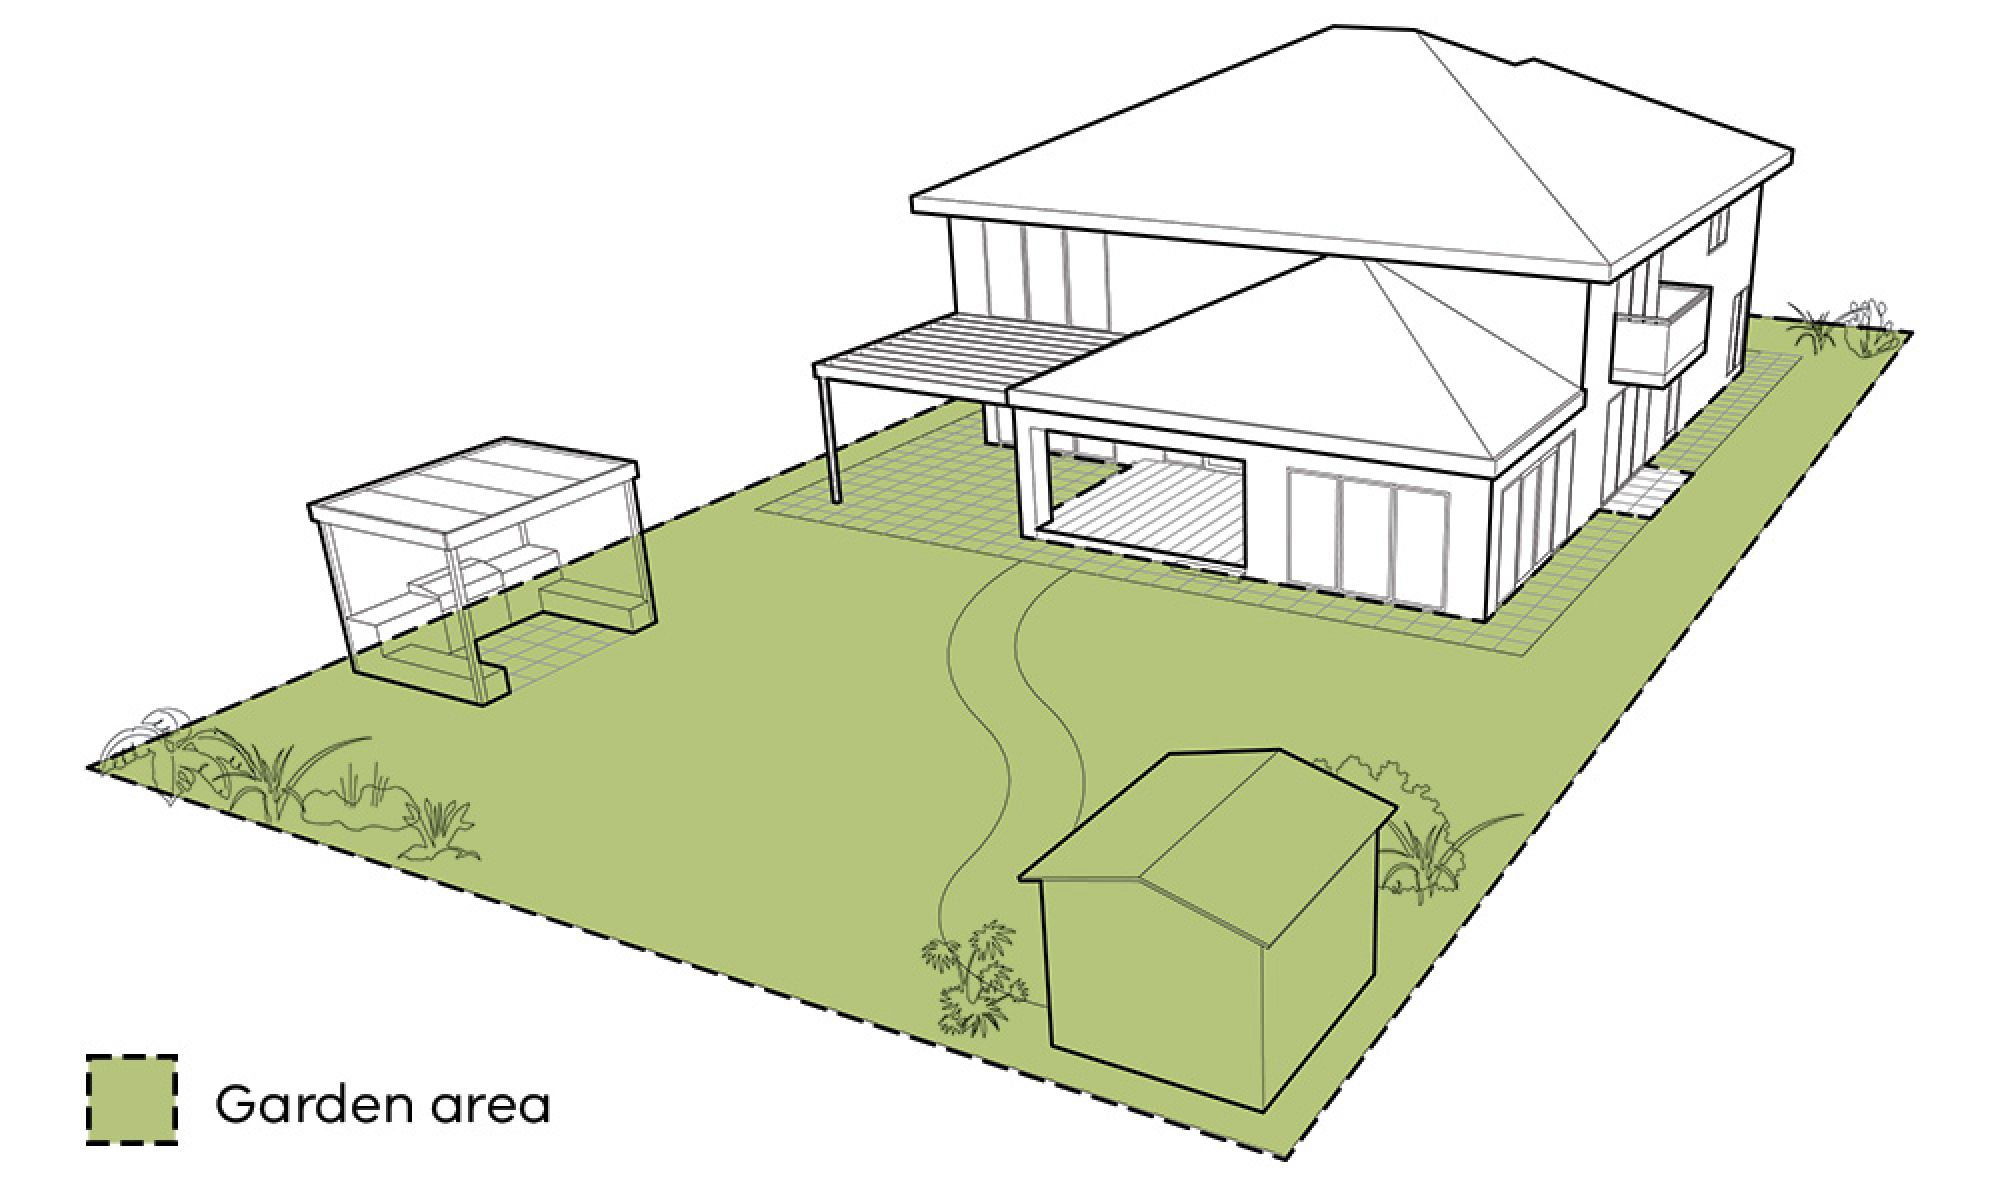 Diagram of rear view of typical single dwelling